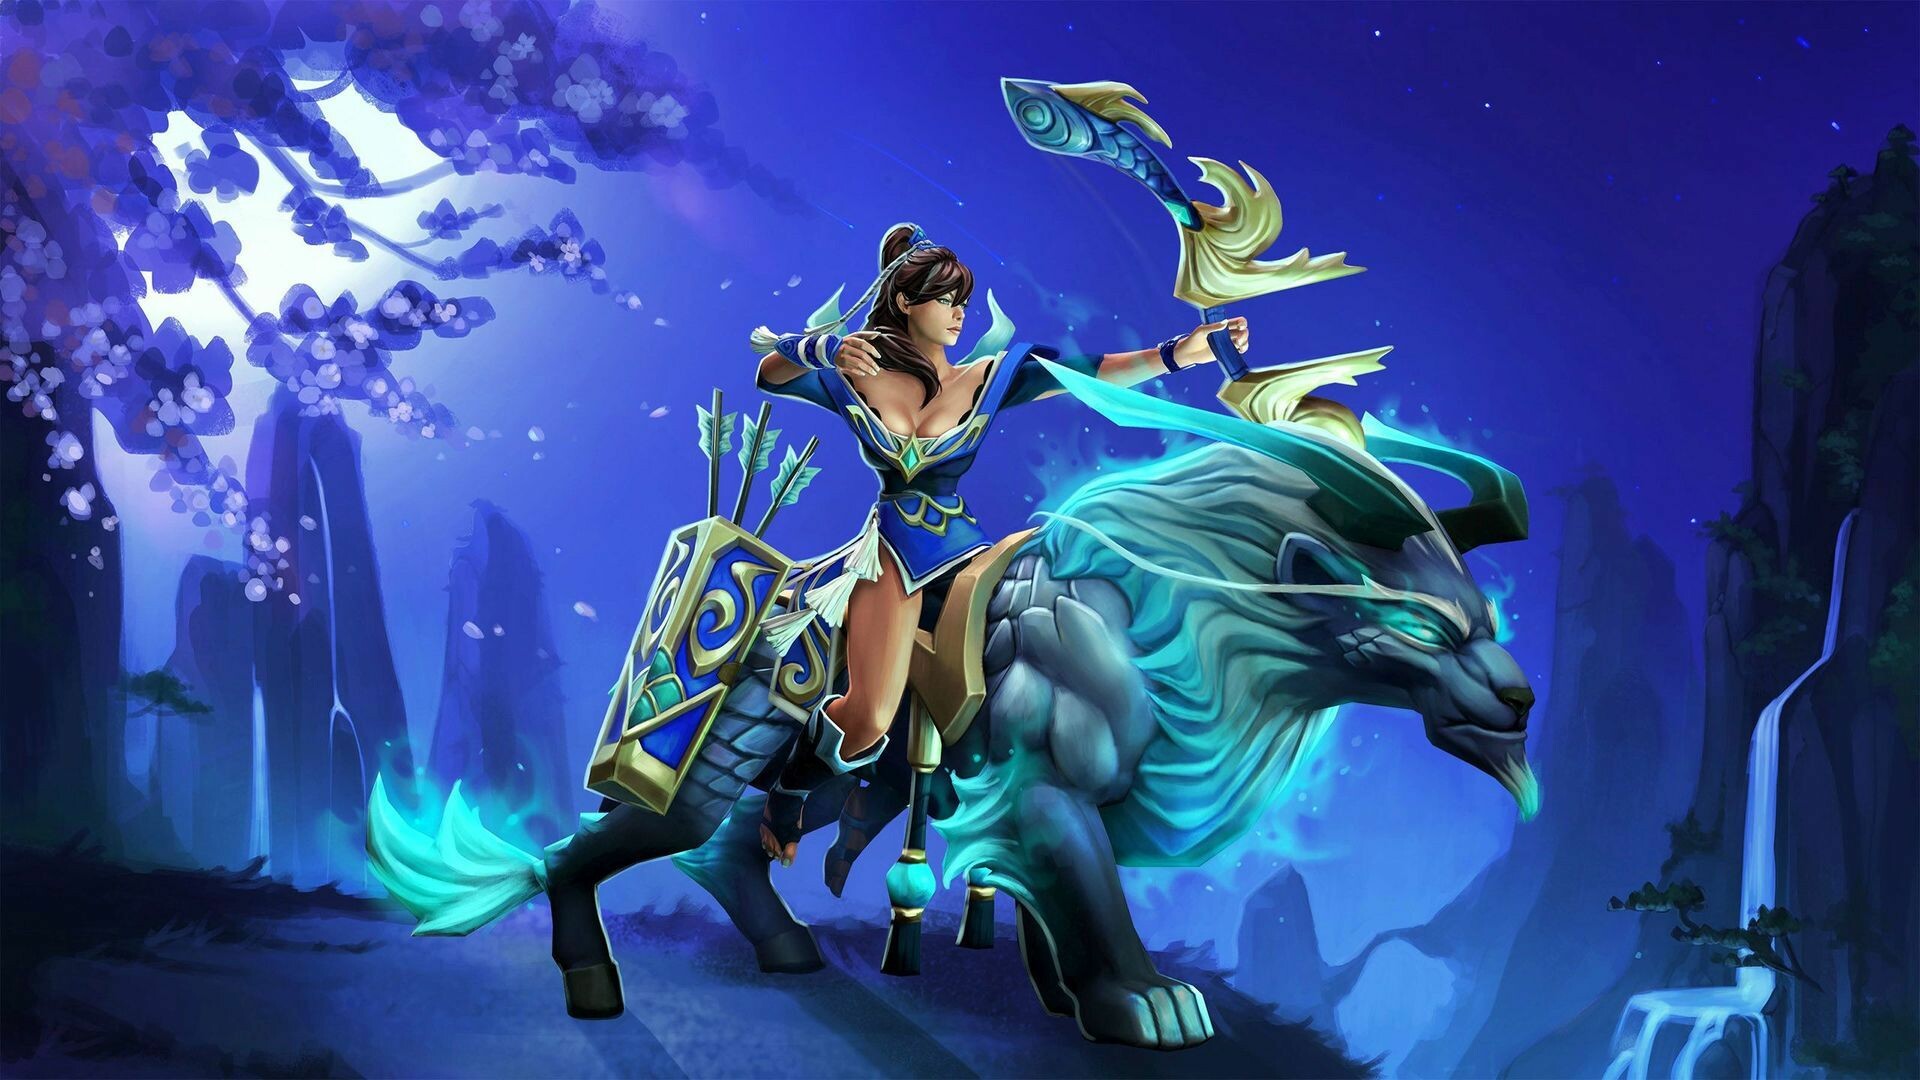 Dota 2: Luna, the Moon Rider, The Scourge of the Plains. 1920x1080 Full HD Wallpaper.